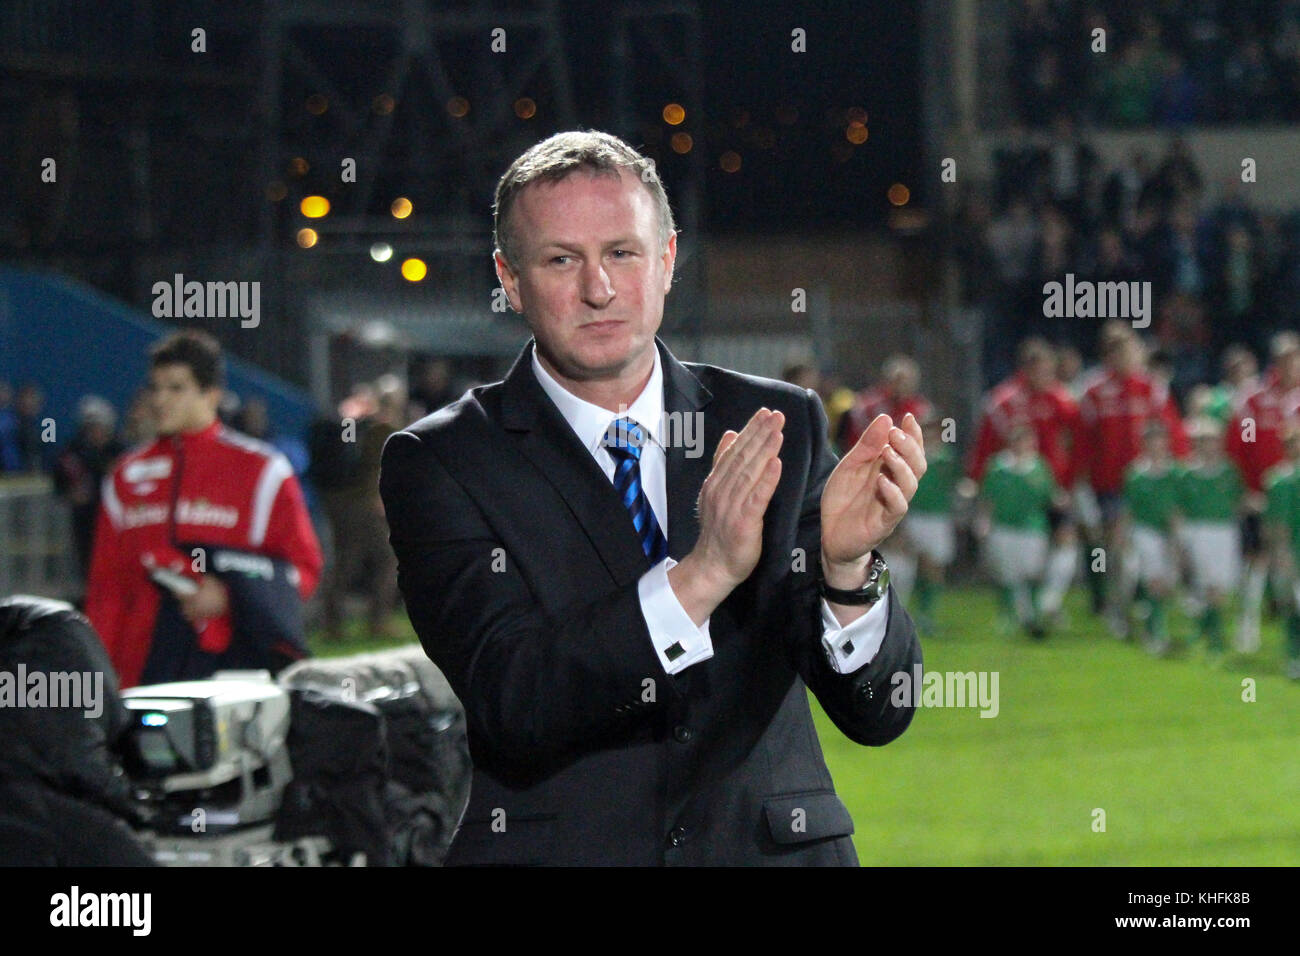 Michael O'Neill's first game in charge of Northern Ireland. O'Neill succeeded Nigel Worthington and his first game was at home to Norway on 29 February 2012 at Windsor Park Belfast. O'Neill responds to his reception by supporters just before kick-off. Stock Photo